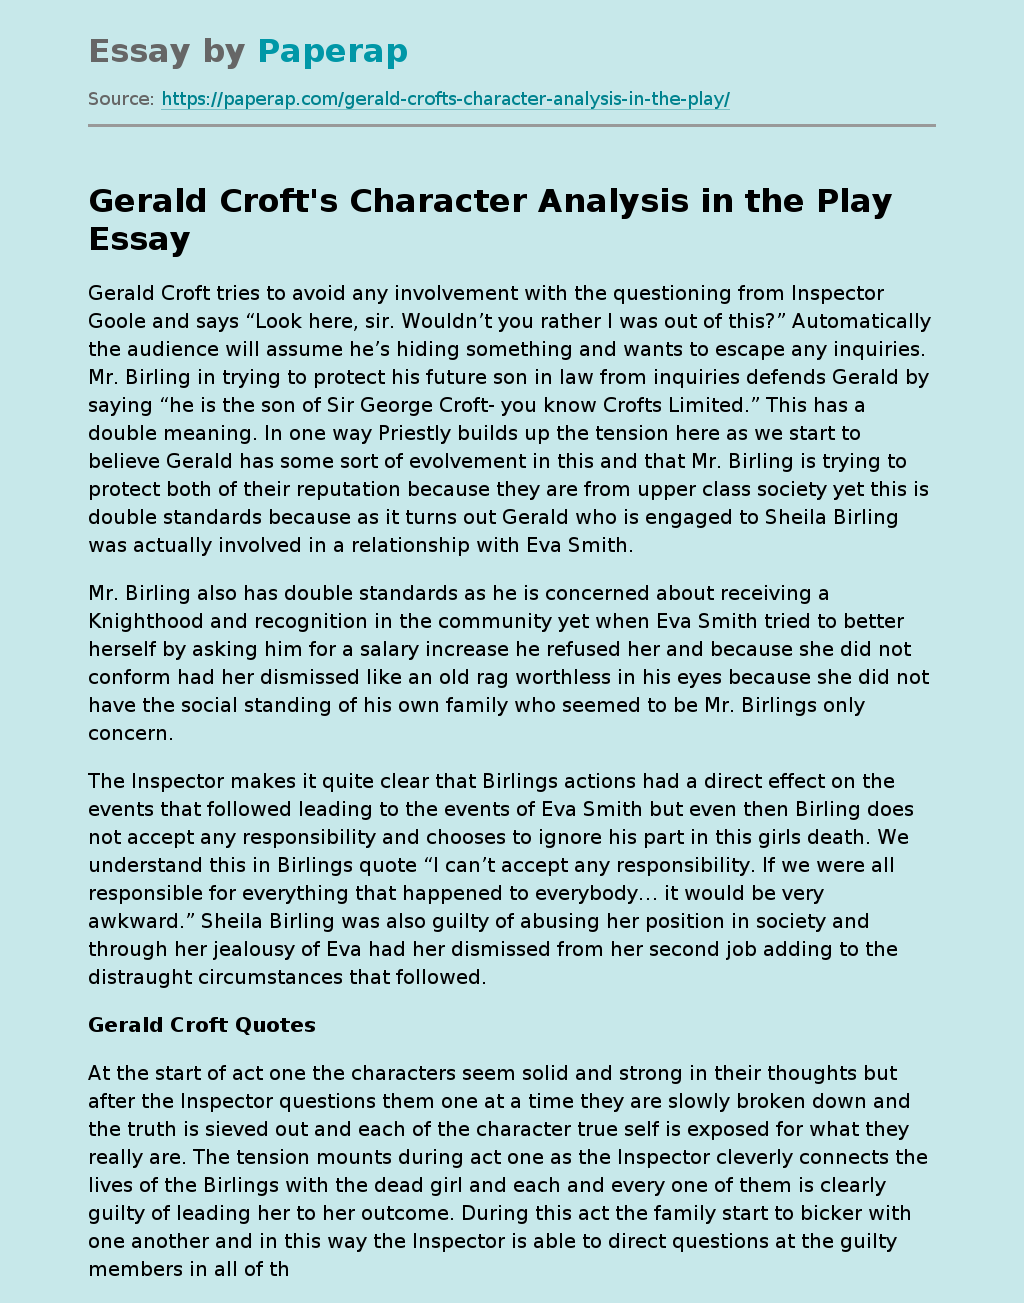 Gerald Croft's Character Analysis in the Play